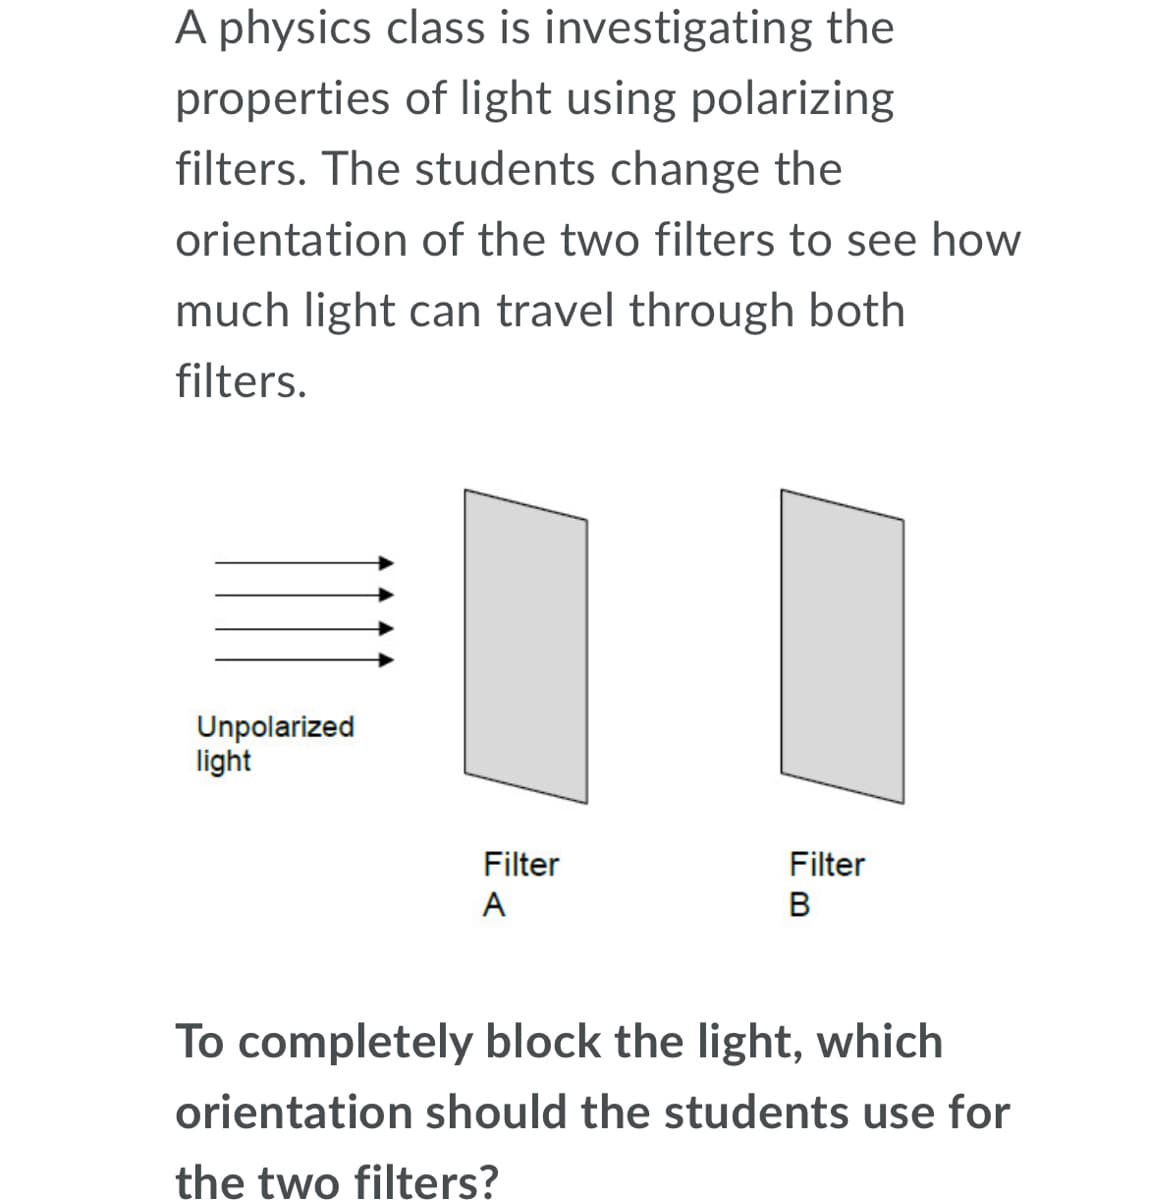 A physics class is investigating the
properties of light using polarizing
filters. The students change the
orientation of the two filters to see how
much light can travel through both
filters.
Unpolarized
light
Filter
Filter
A
To completely block the light, which
orientation should the students use for
the two filters?
